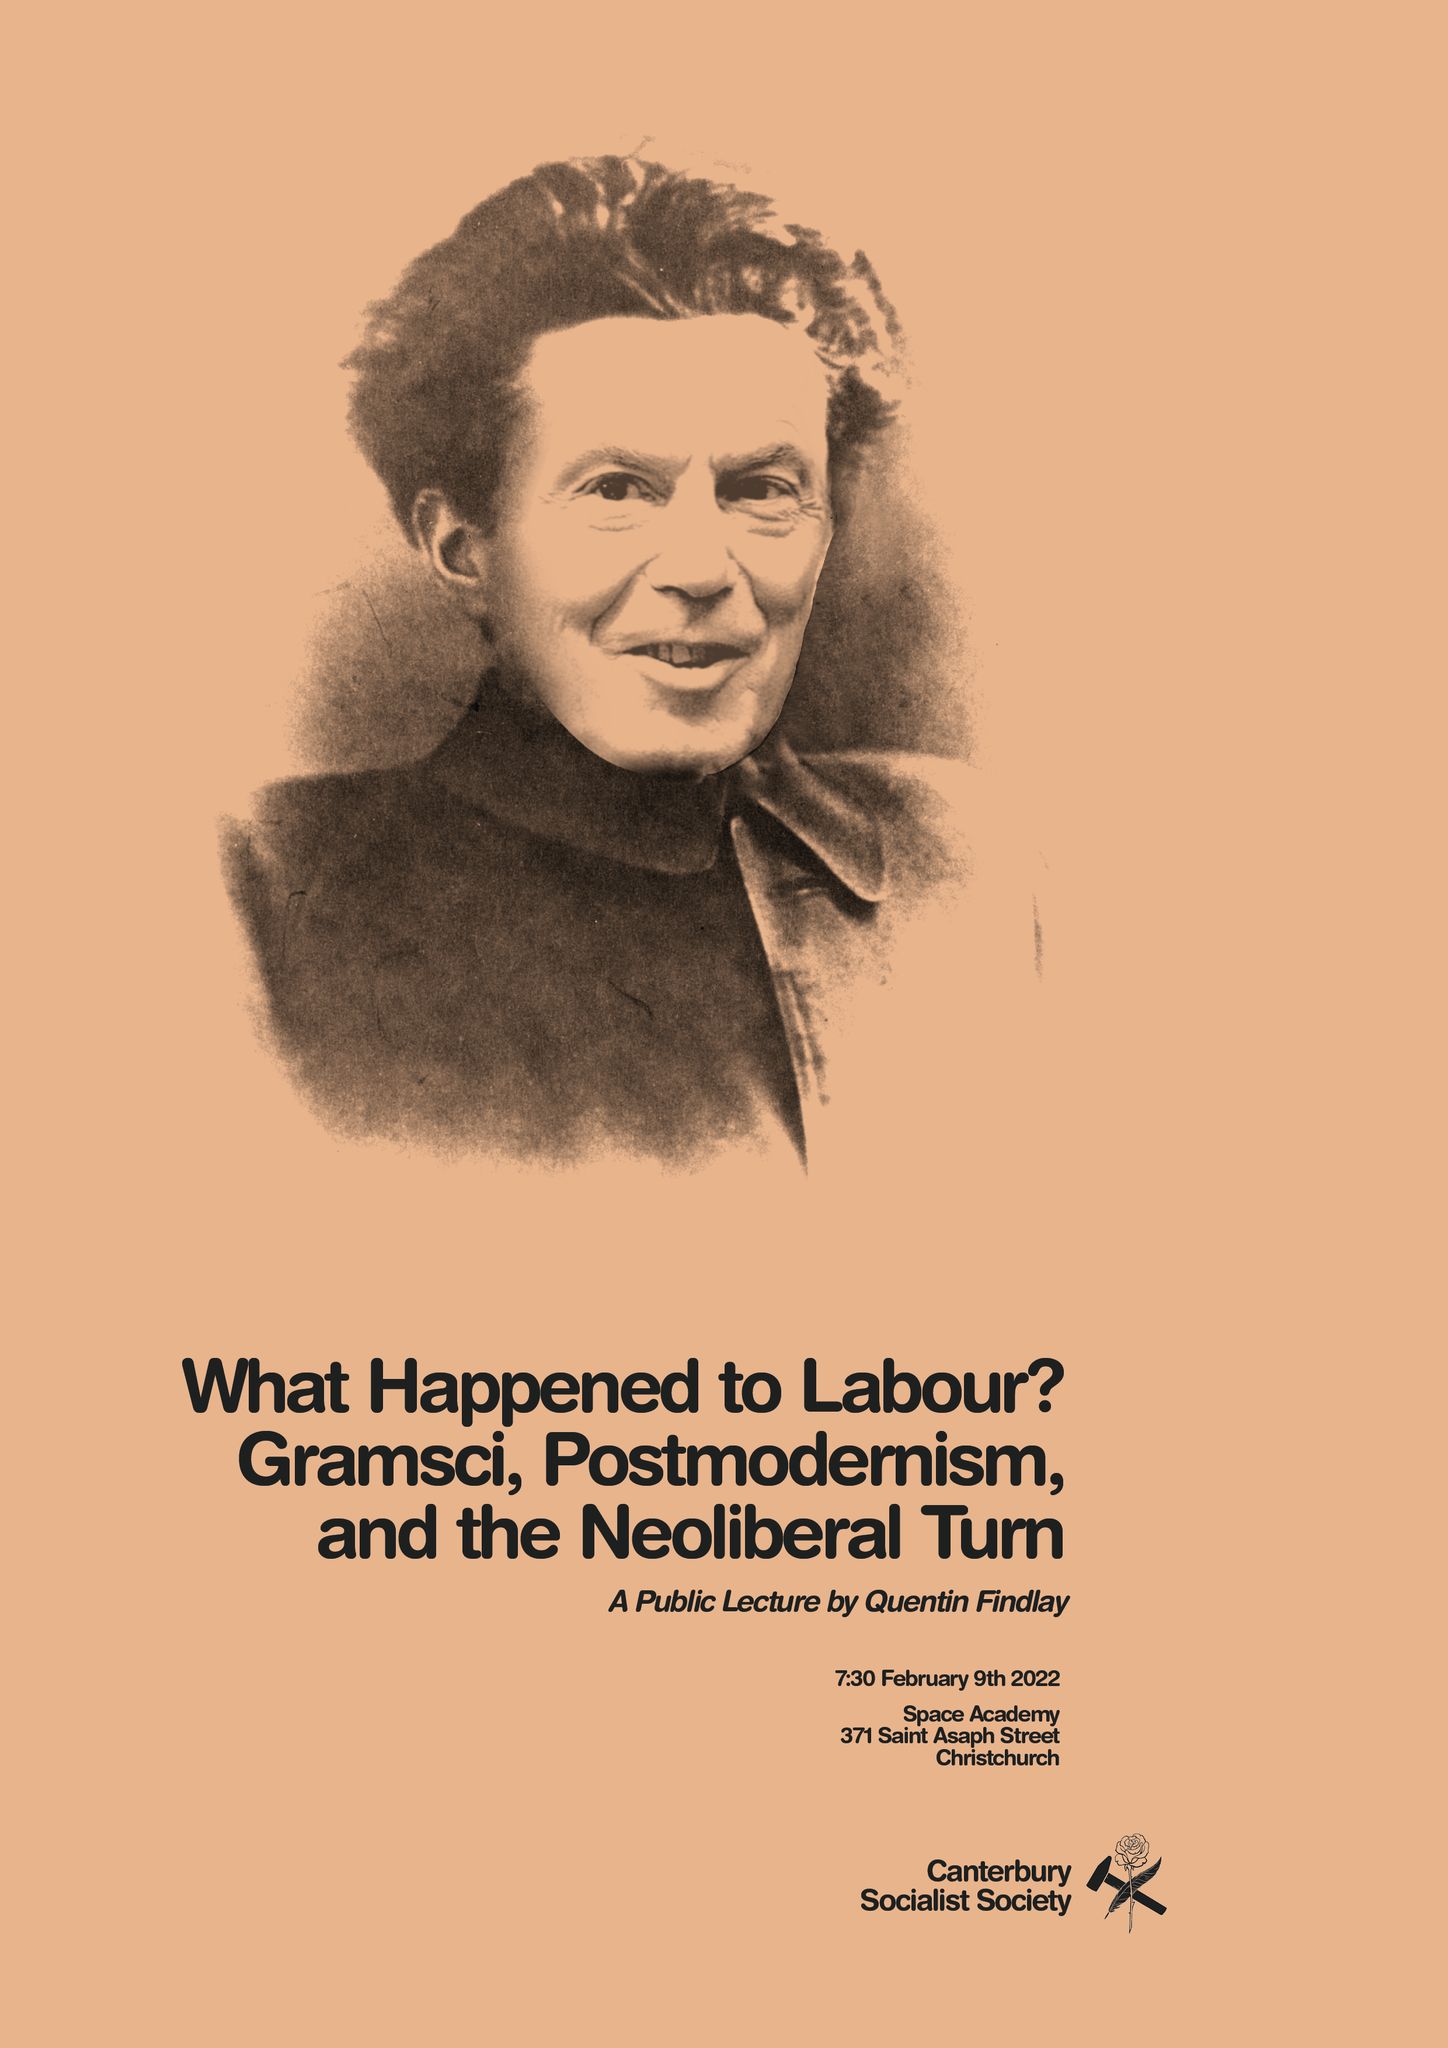 CSS Public Lecture:  What Happened to Labour? Gramsci, Postmodernism, and the Neoliberal Turn